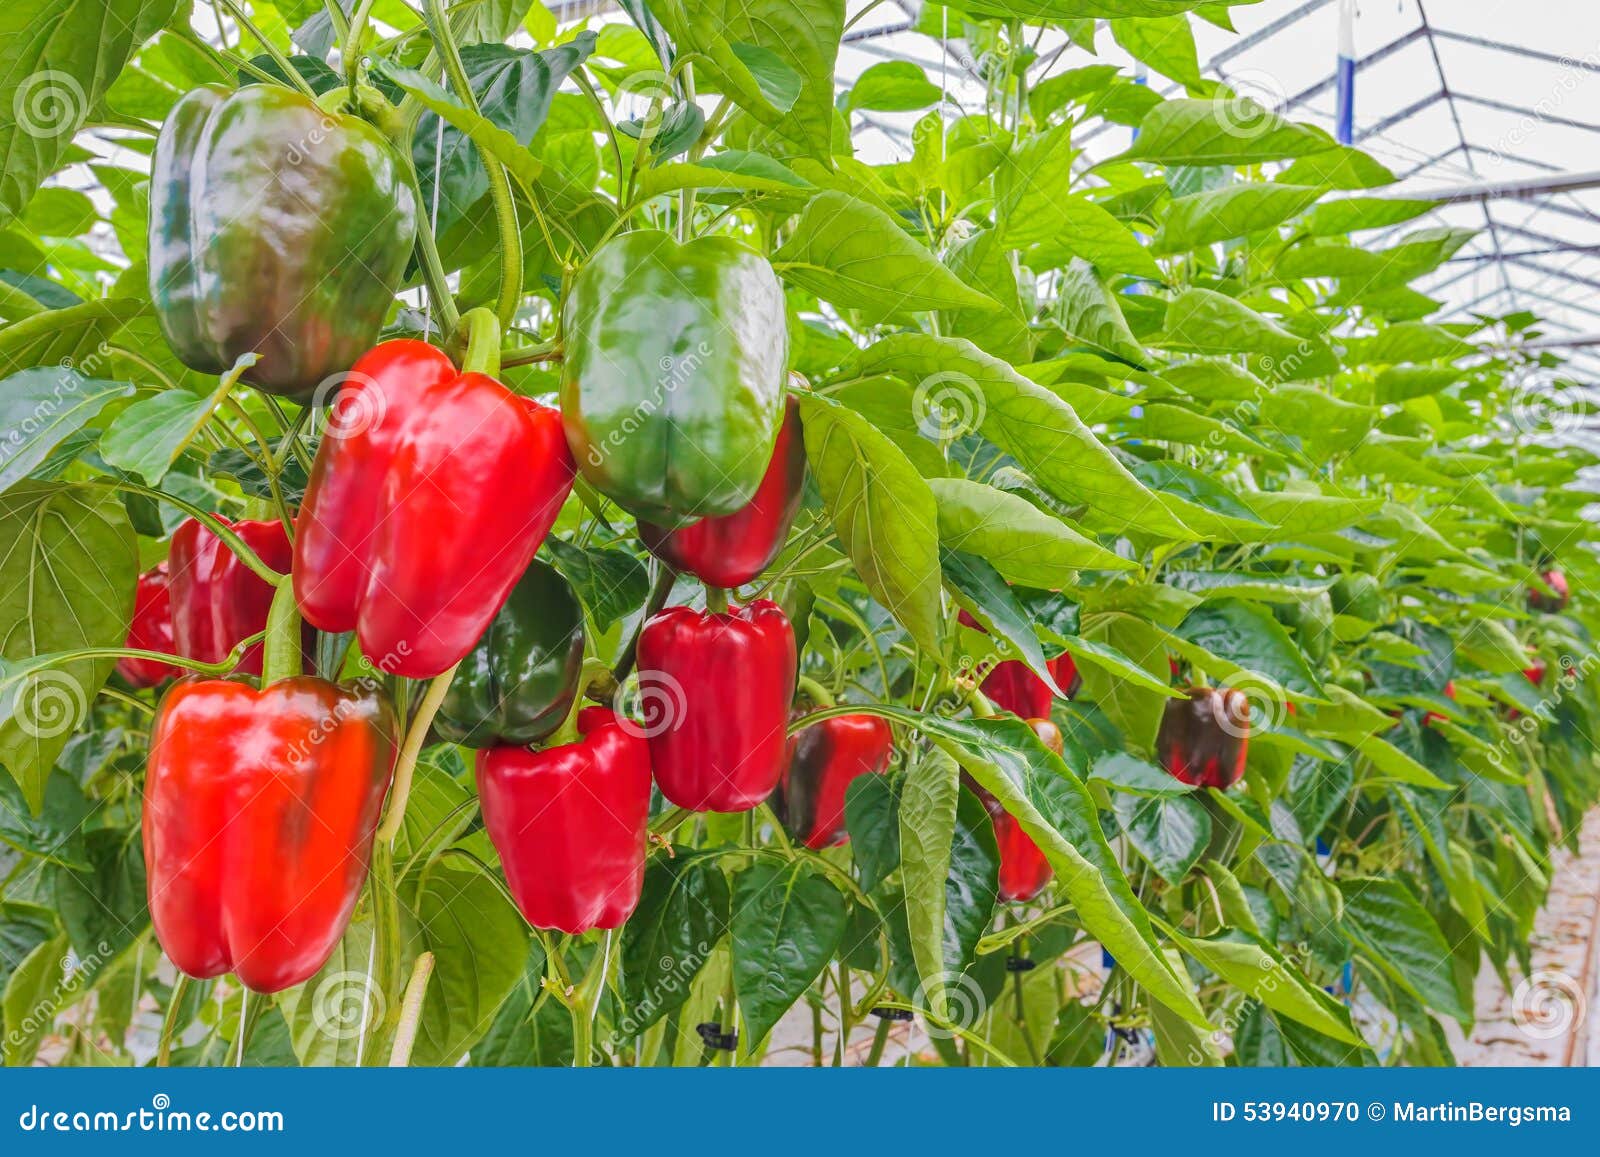 red bell peppers in a greenhouse